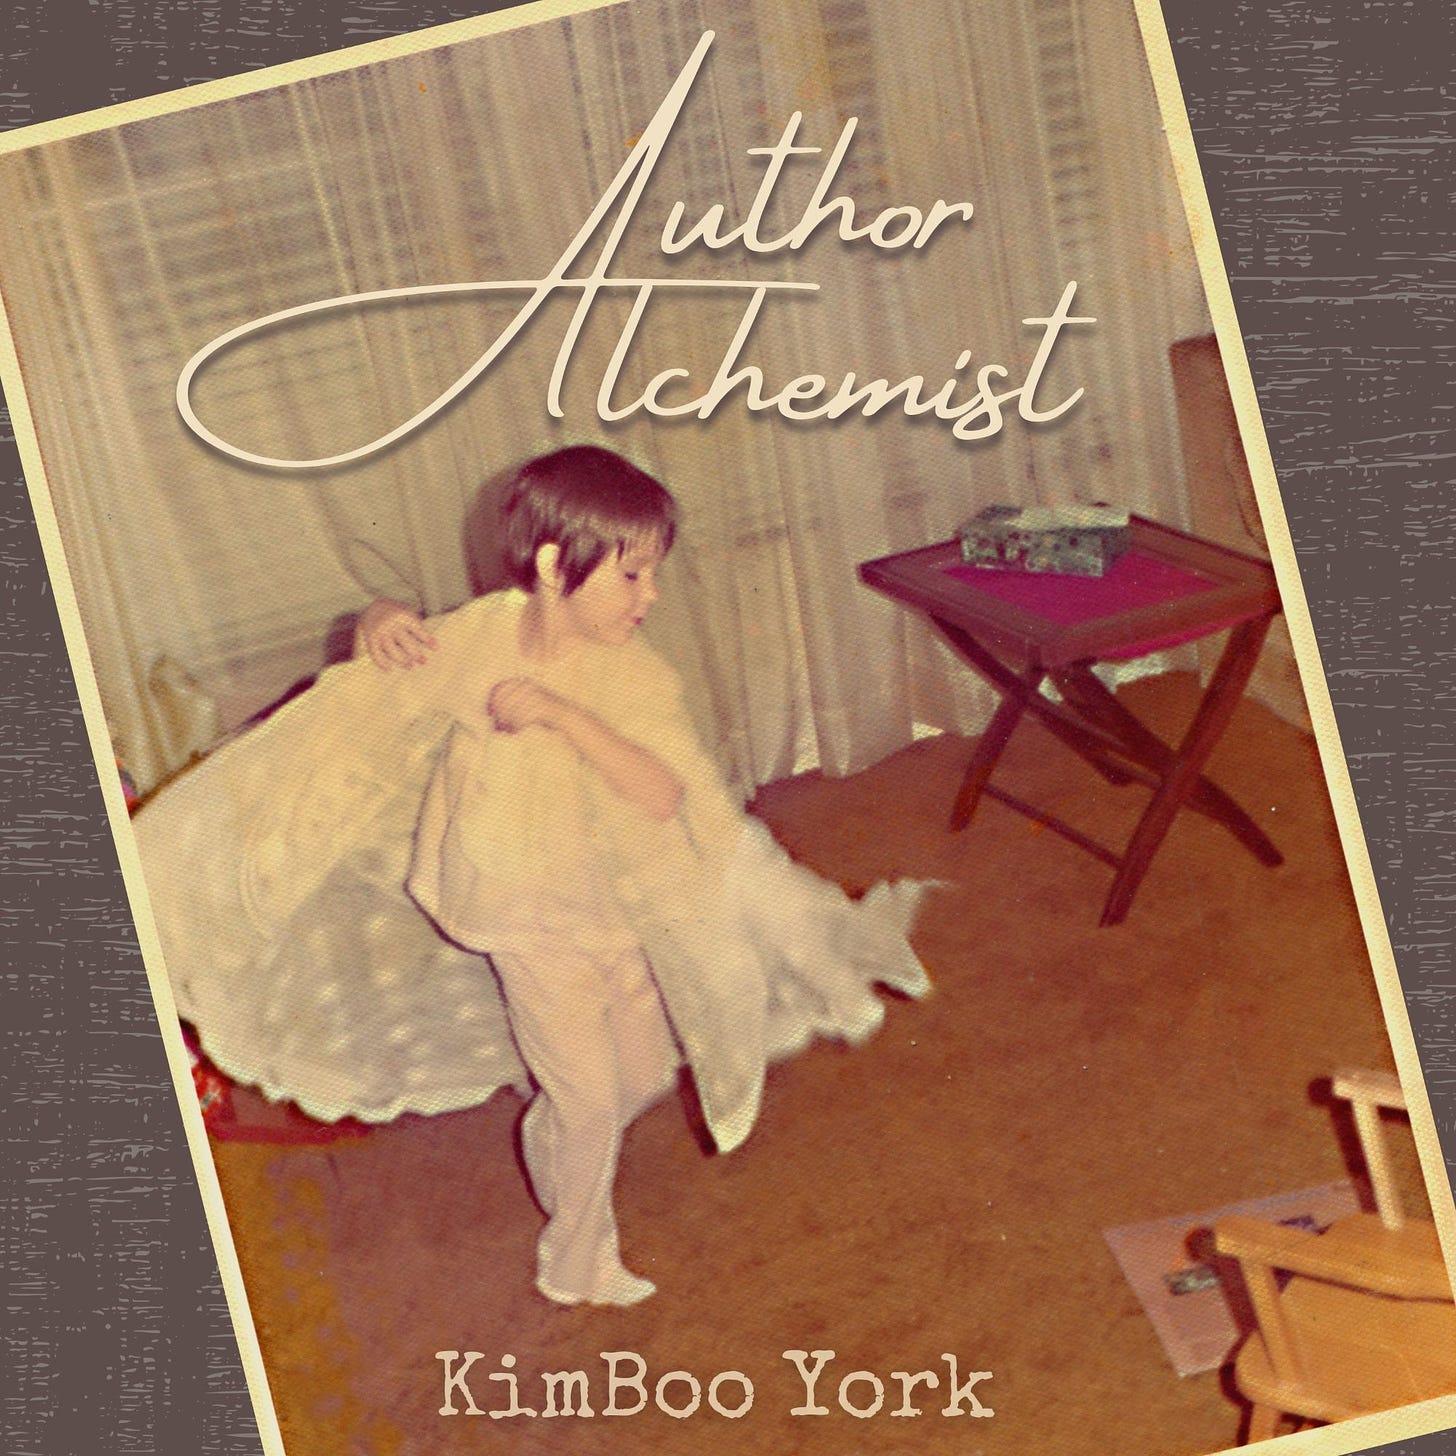 Podcast cover for Author Alchemist podcast, featuring a photo of KimBoo at around 5 years old, dancing around